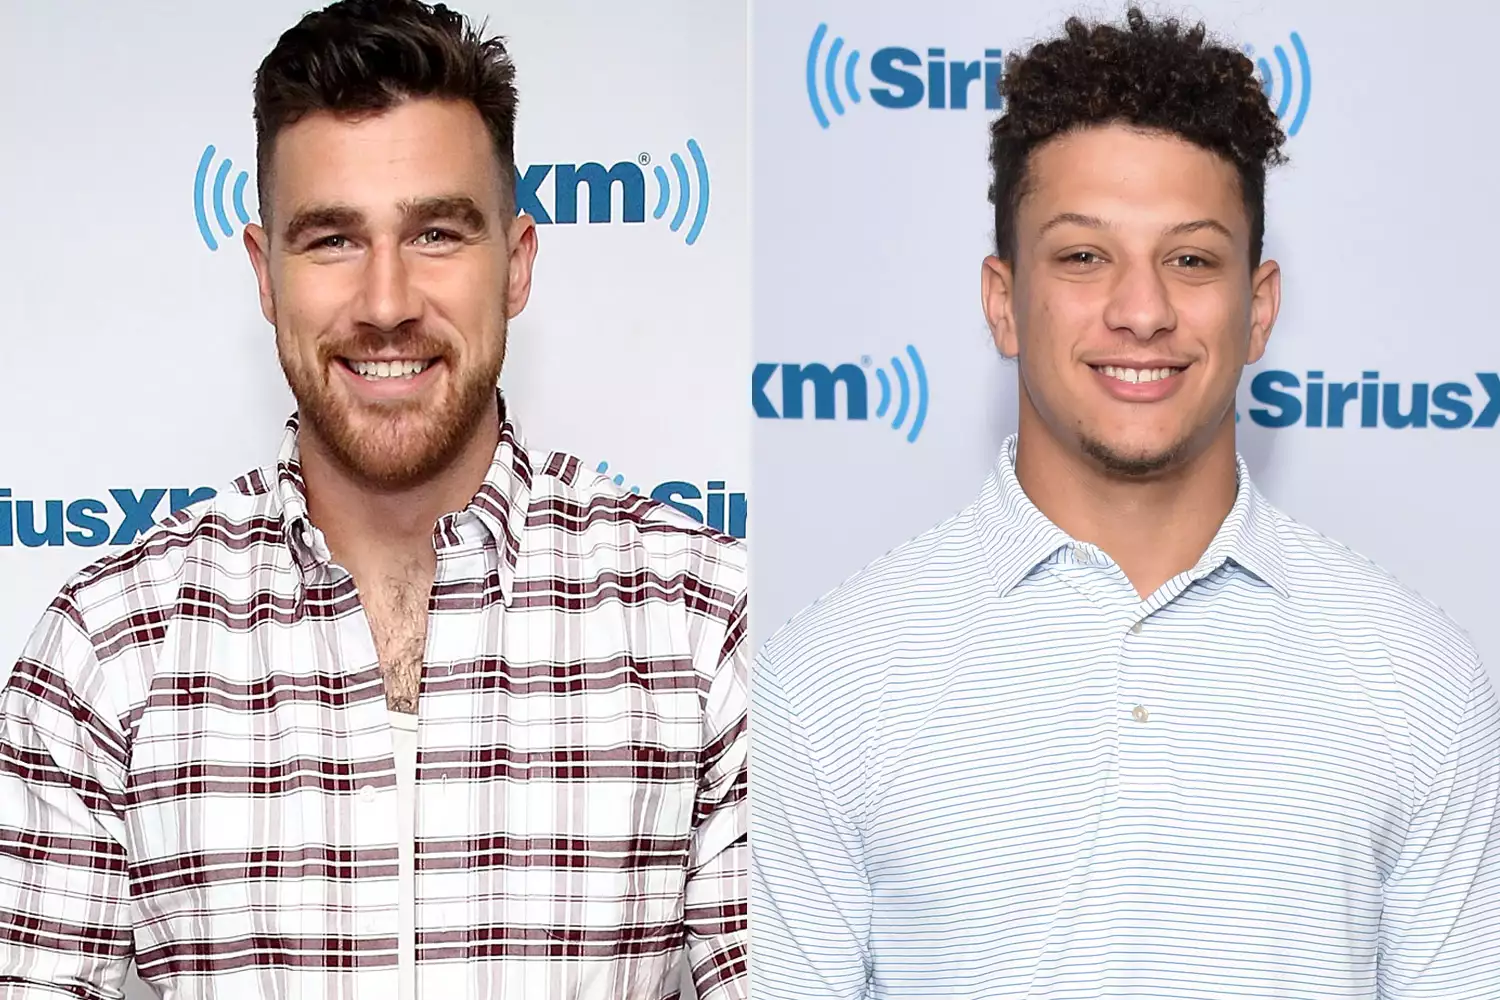 NEW YORK, NY - APRIL 25: Football quarterback and NFL draft prospect Patrick Mahomes visits SiriusXM Studios on April 25, 2017 in New York City. (Photo by Matthew Eisman/Getty Images) NEW YORK, NY - JULY 27: (EXCLUSIVE COVERAGE) NFL star Travis Kelce visits the SiriusXM Studios on July 27, 2016 in New York City. (Photo by Astrid Stawiarz/Getty Images)